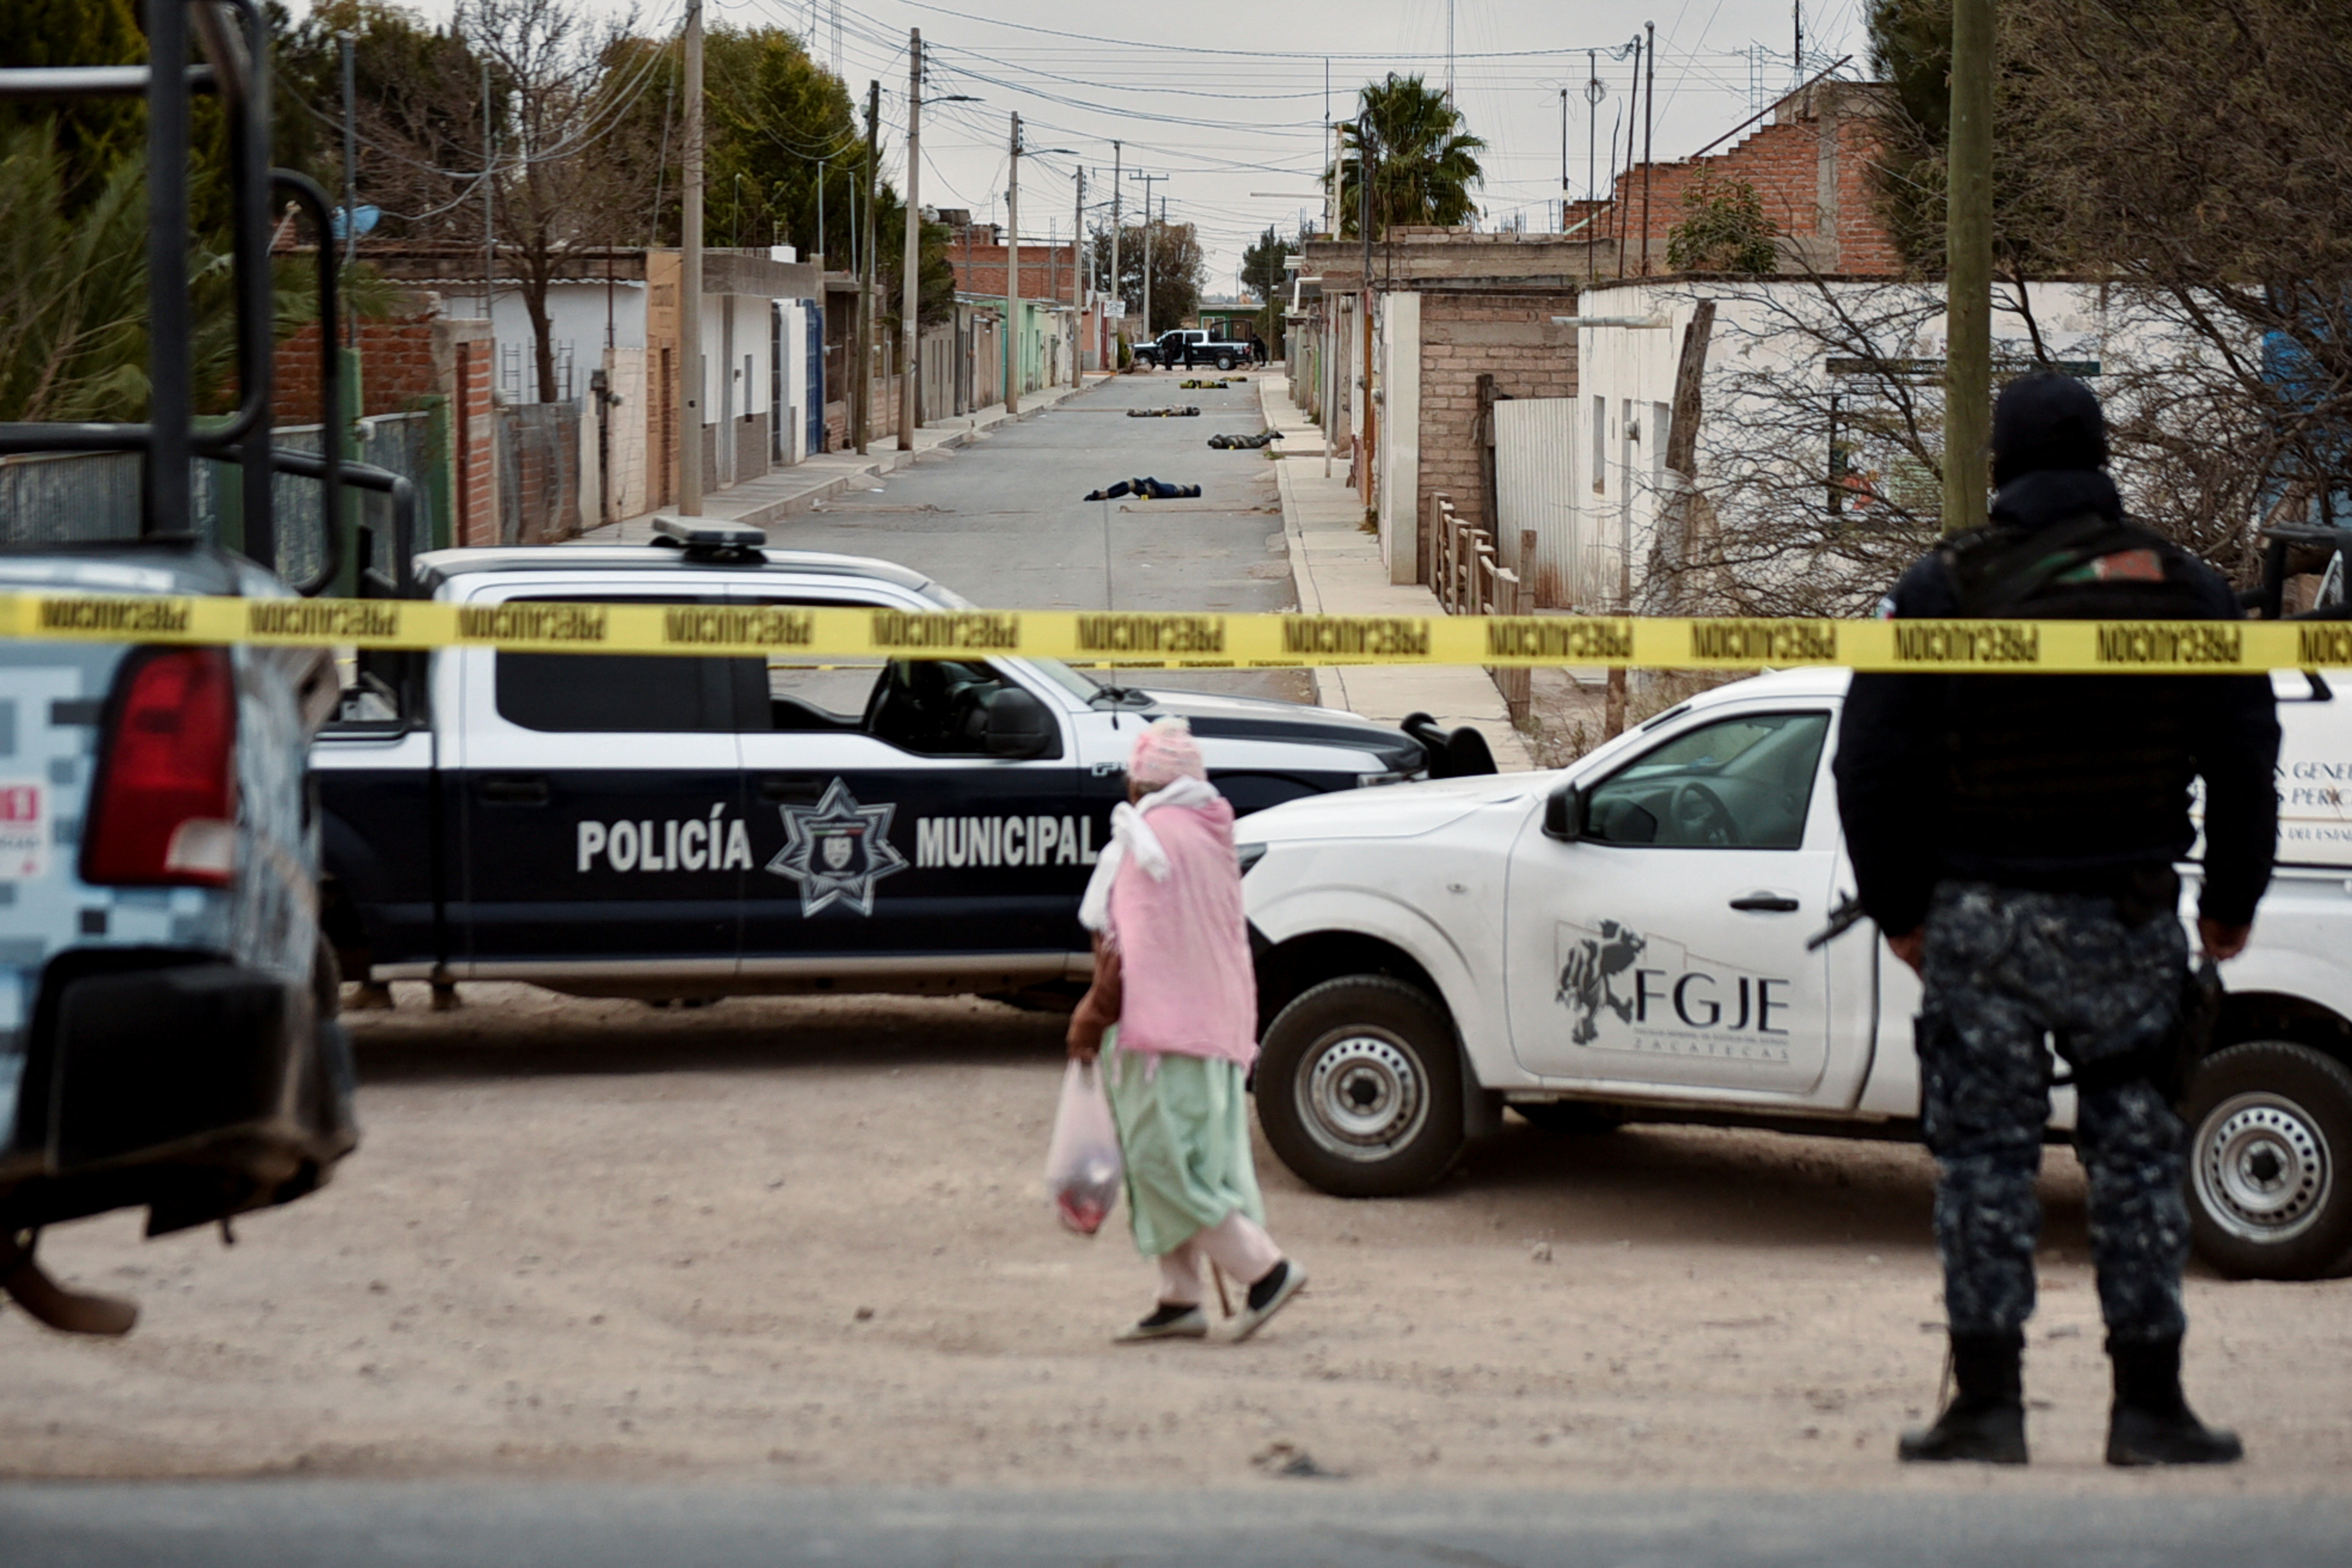 A woman walks at a crime scene where unknown assailants left the bodies of men wrapped in blankets in Fresnillo, Zacatecas state, Mexico February 5, 2022. REUTERS/Edgar Chavez NO RESALES. NO ARCHIVES